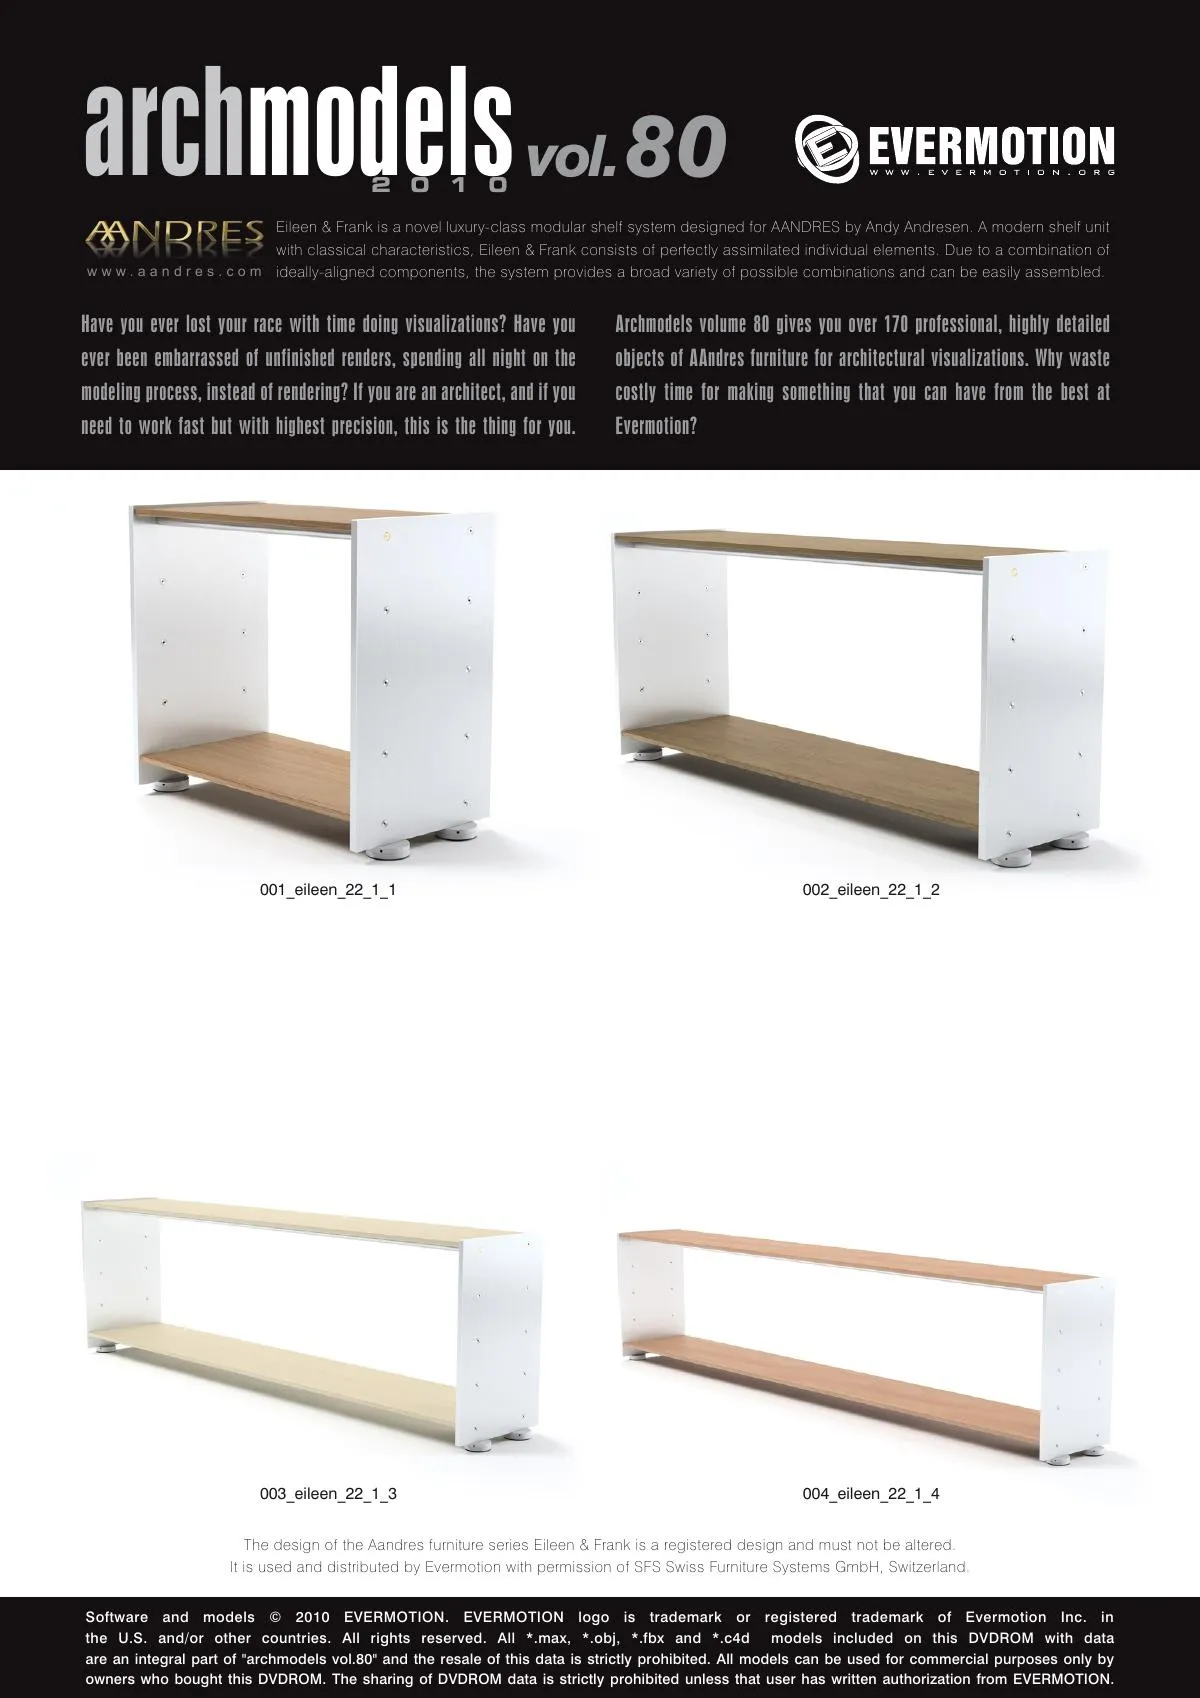 Evermotion Archmodels Vol 080 [furniture]